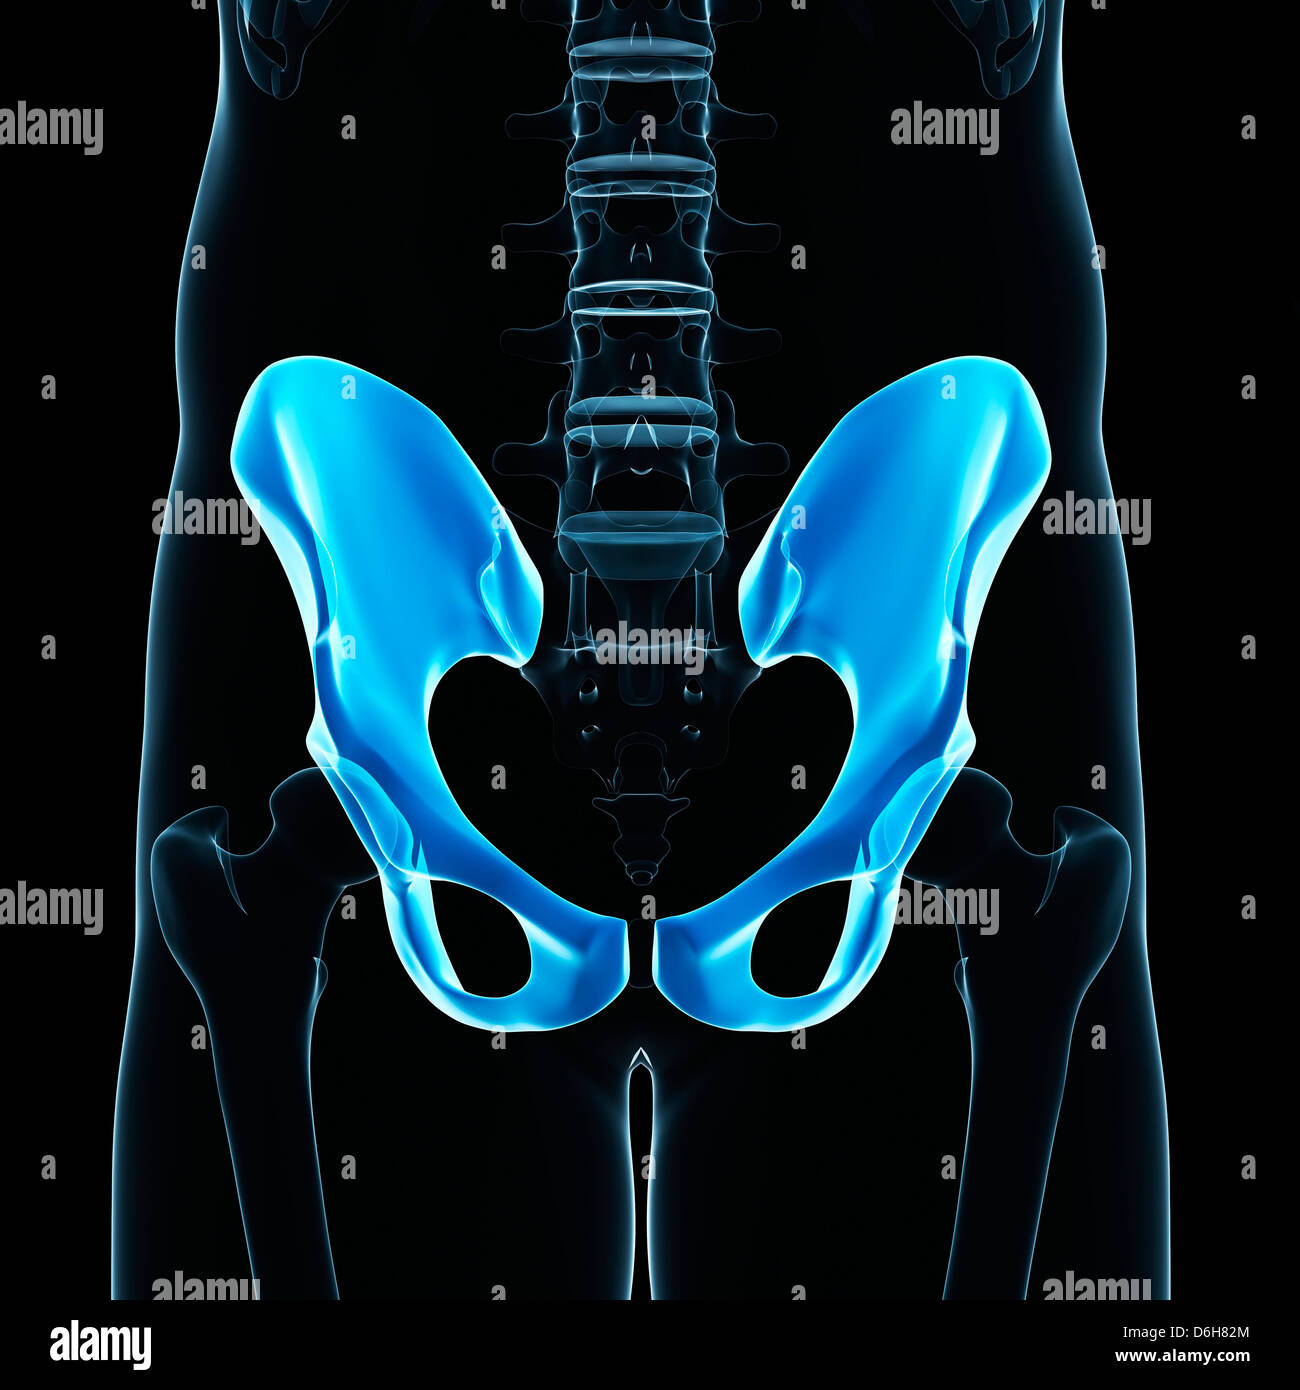 Human Hip Bones High Resolution Stock Photography and Images - Alamy